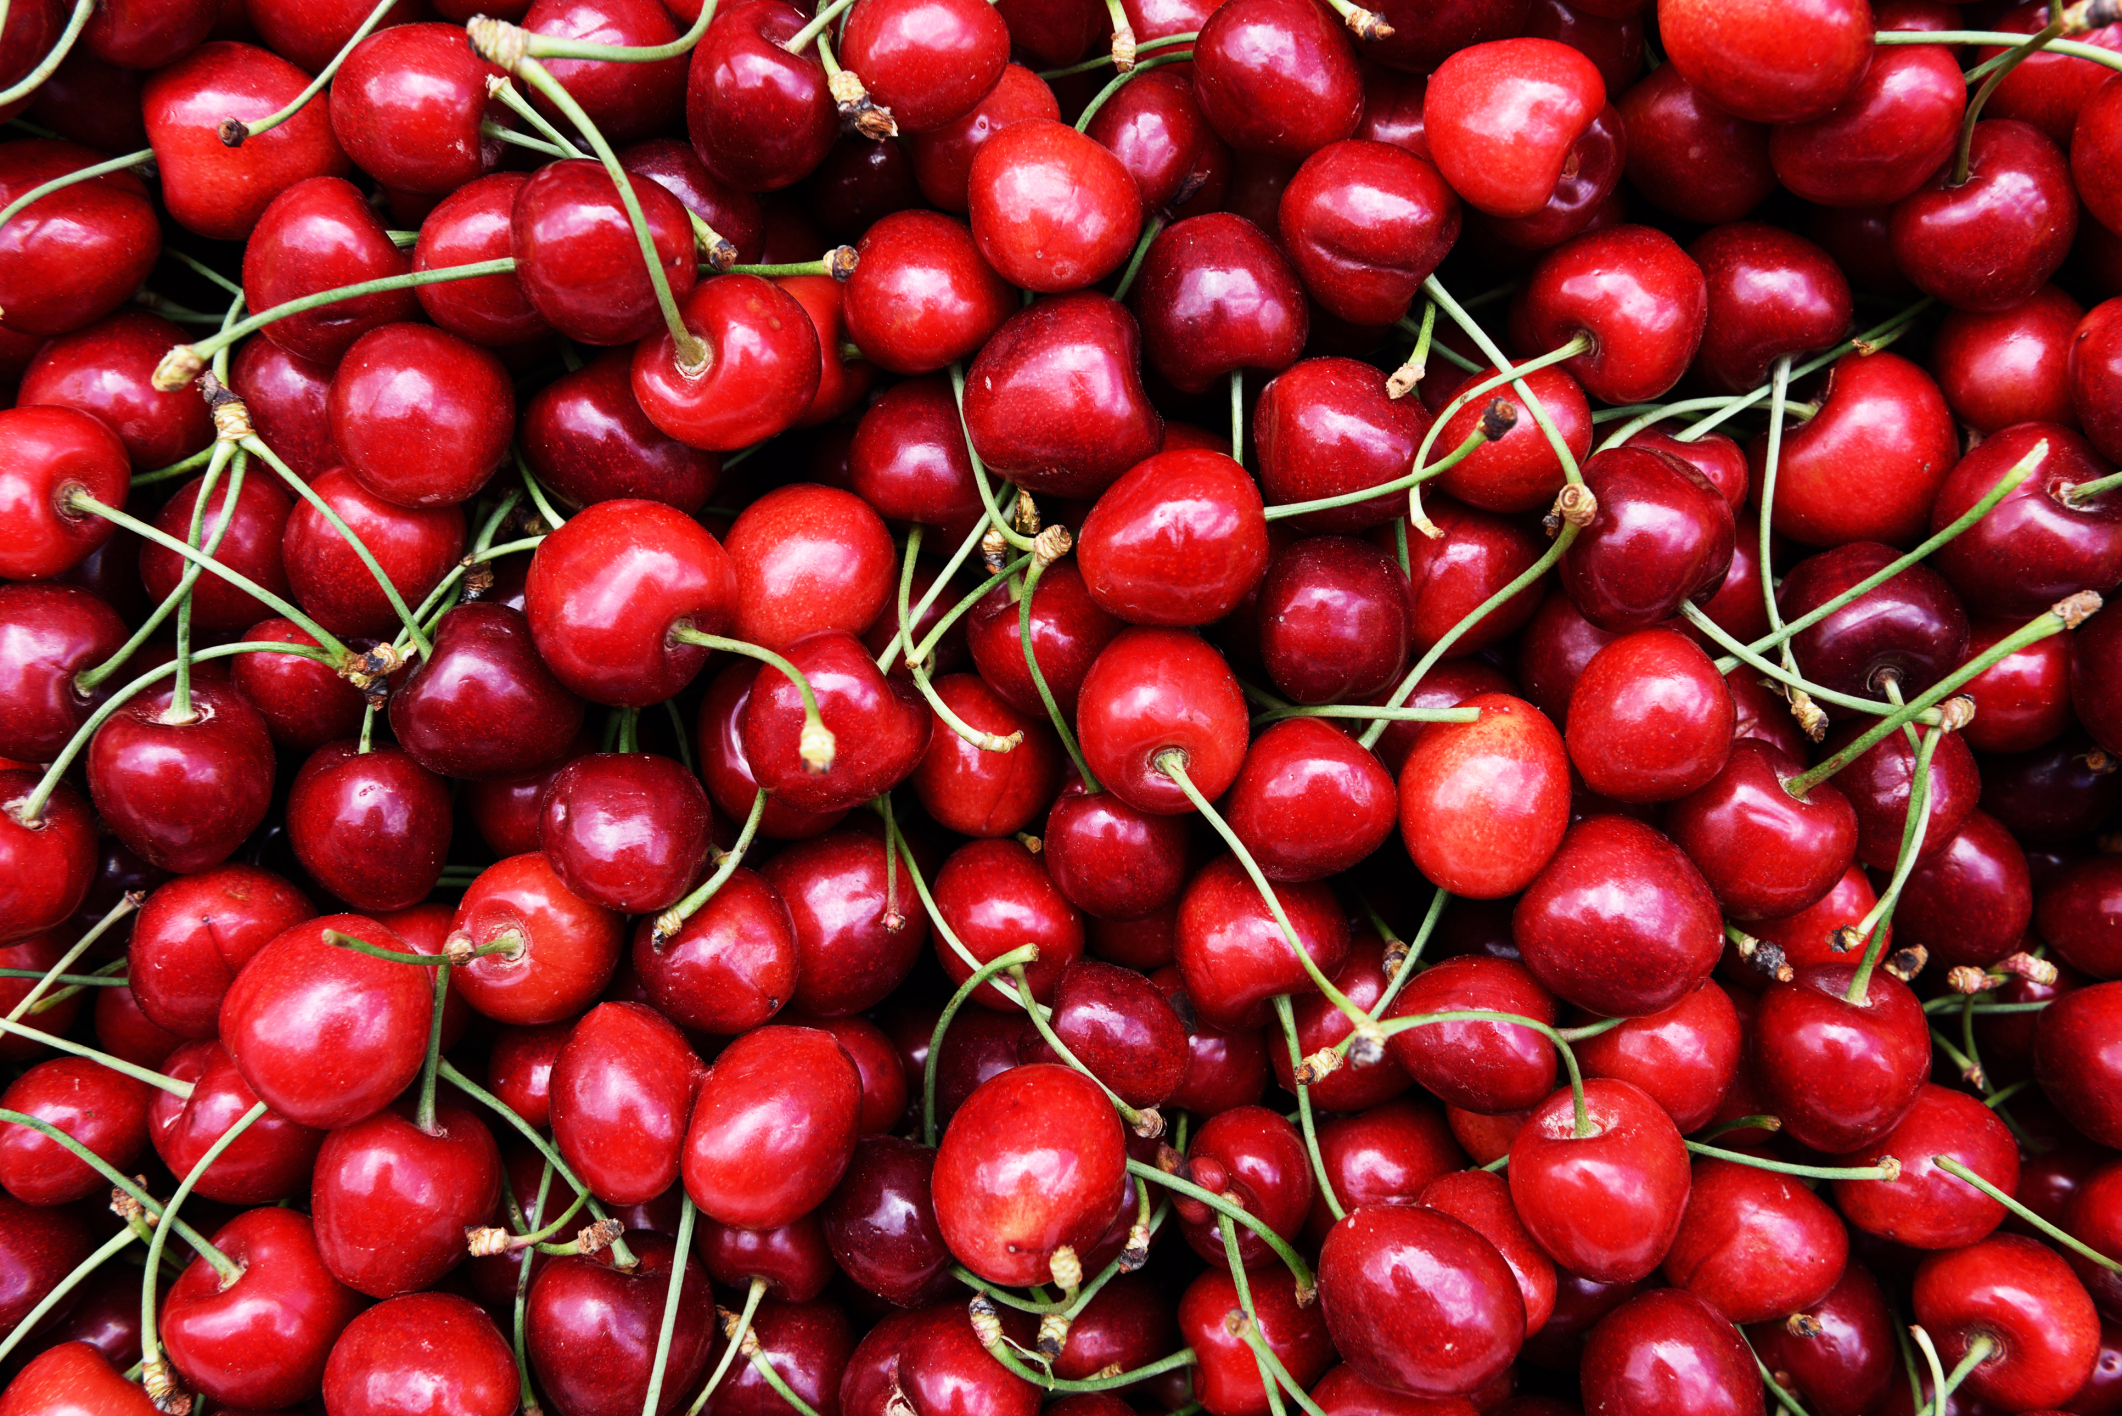 Are Wild Cherries Edible or Poisonous?